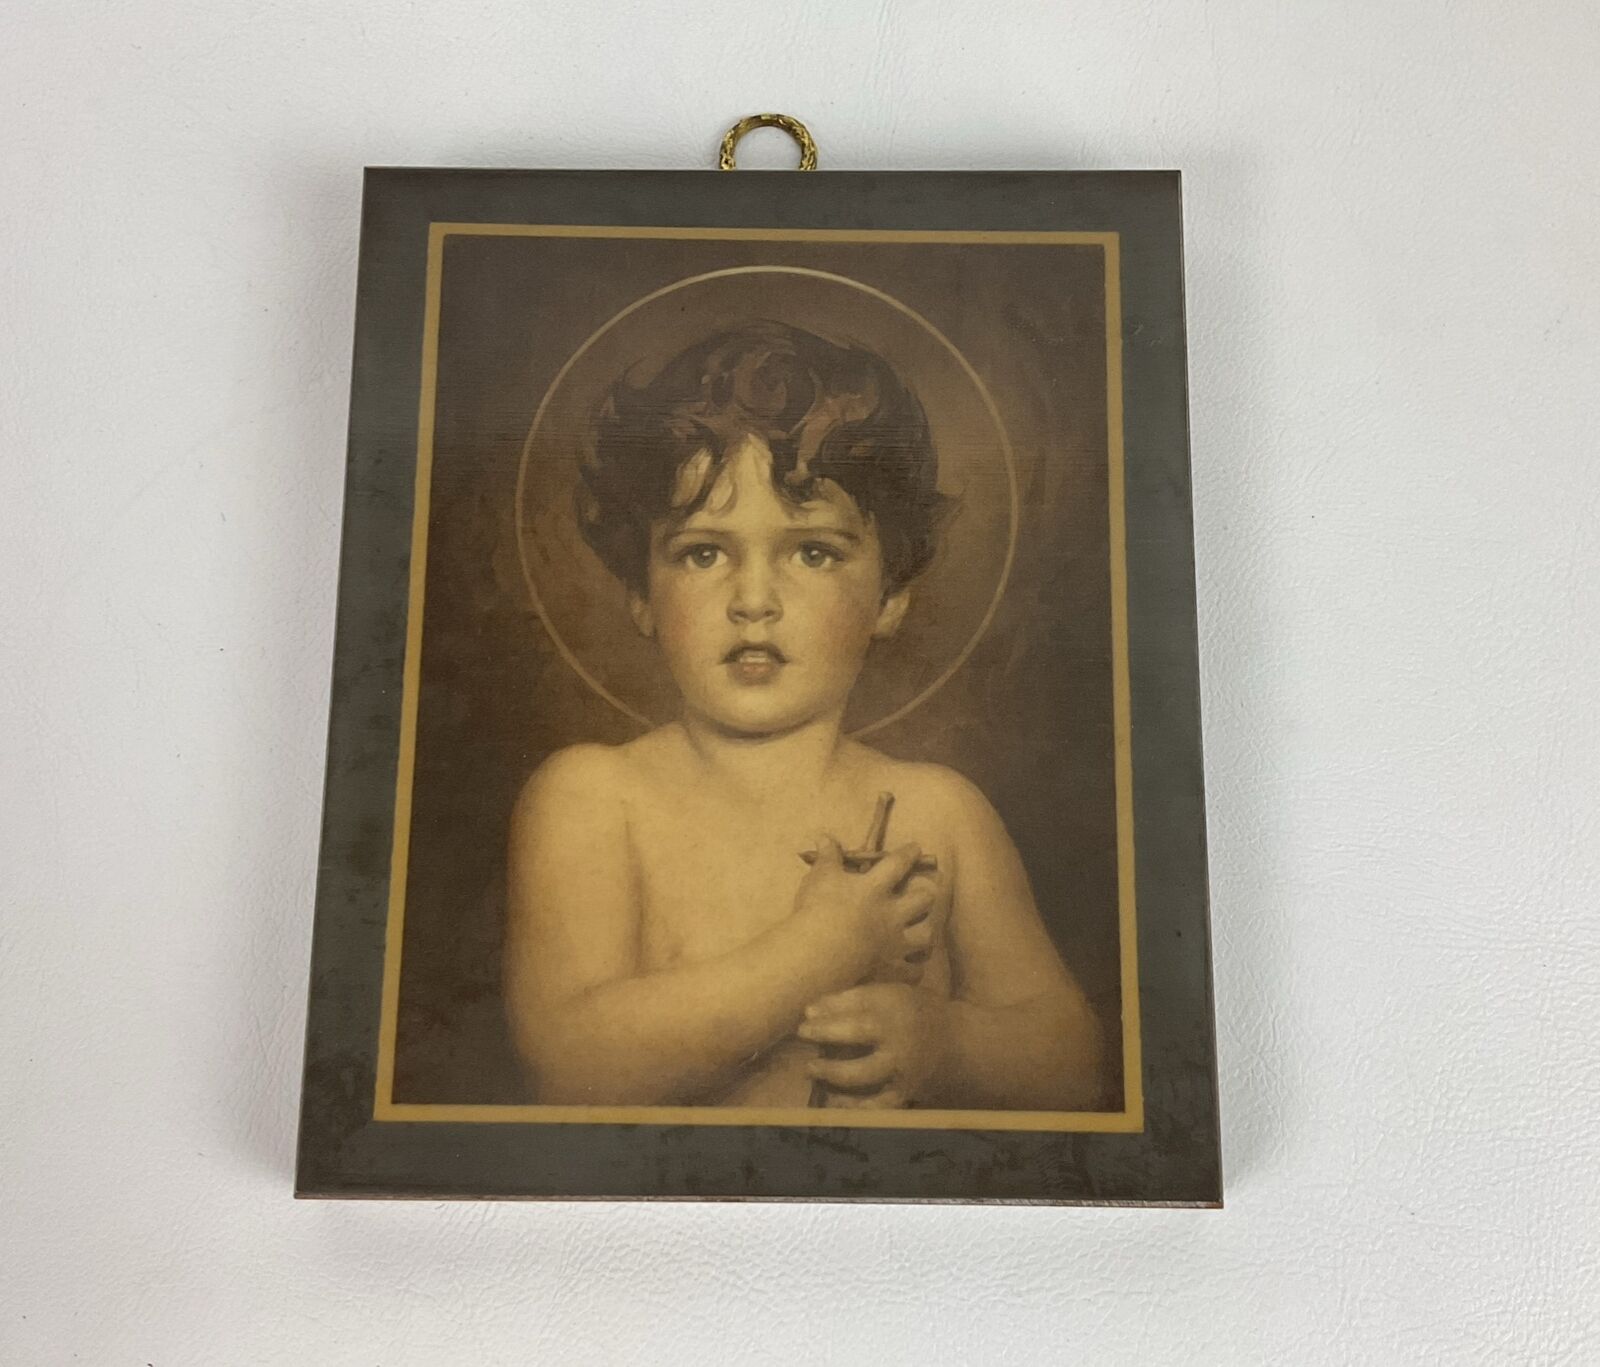 Child St John The Baptist Print Clutching A Cross Nice Old Plaque Vintage